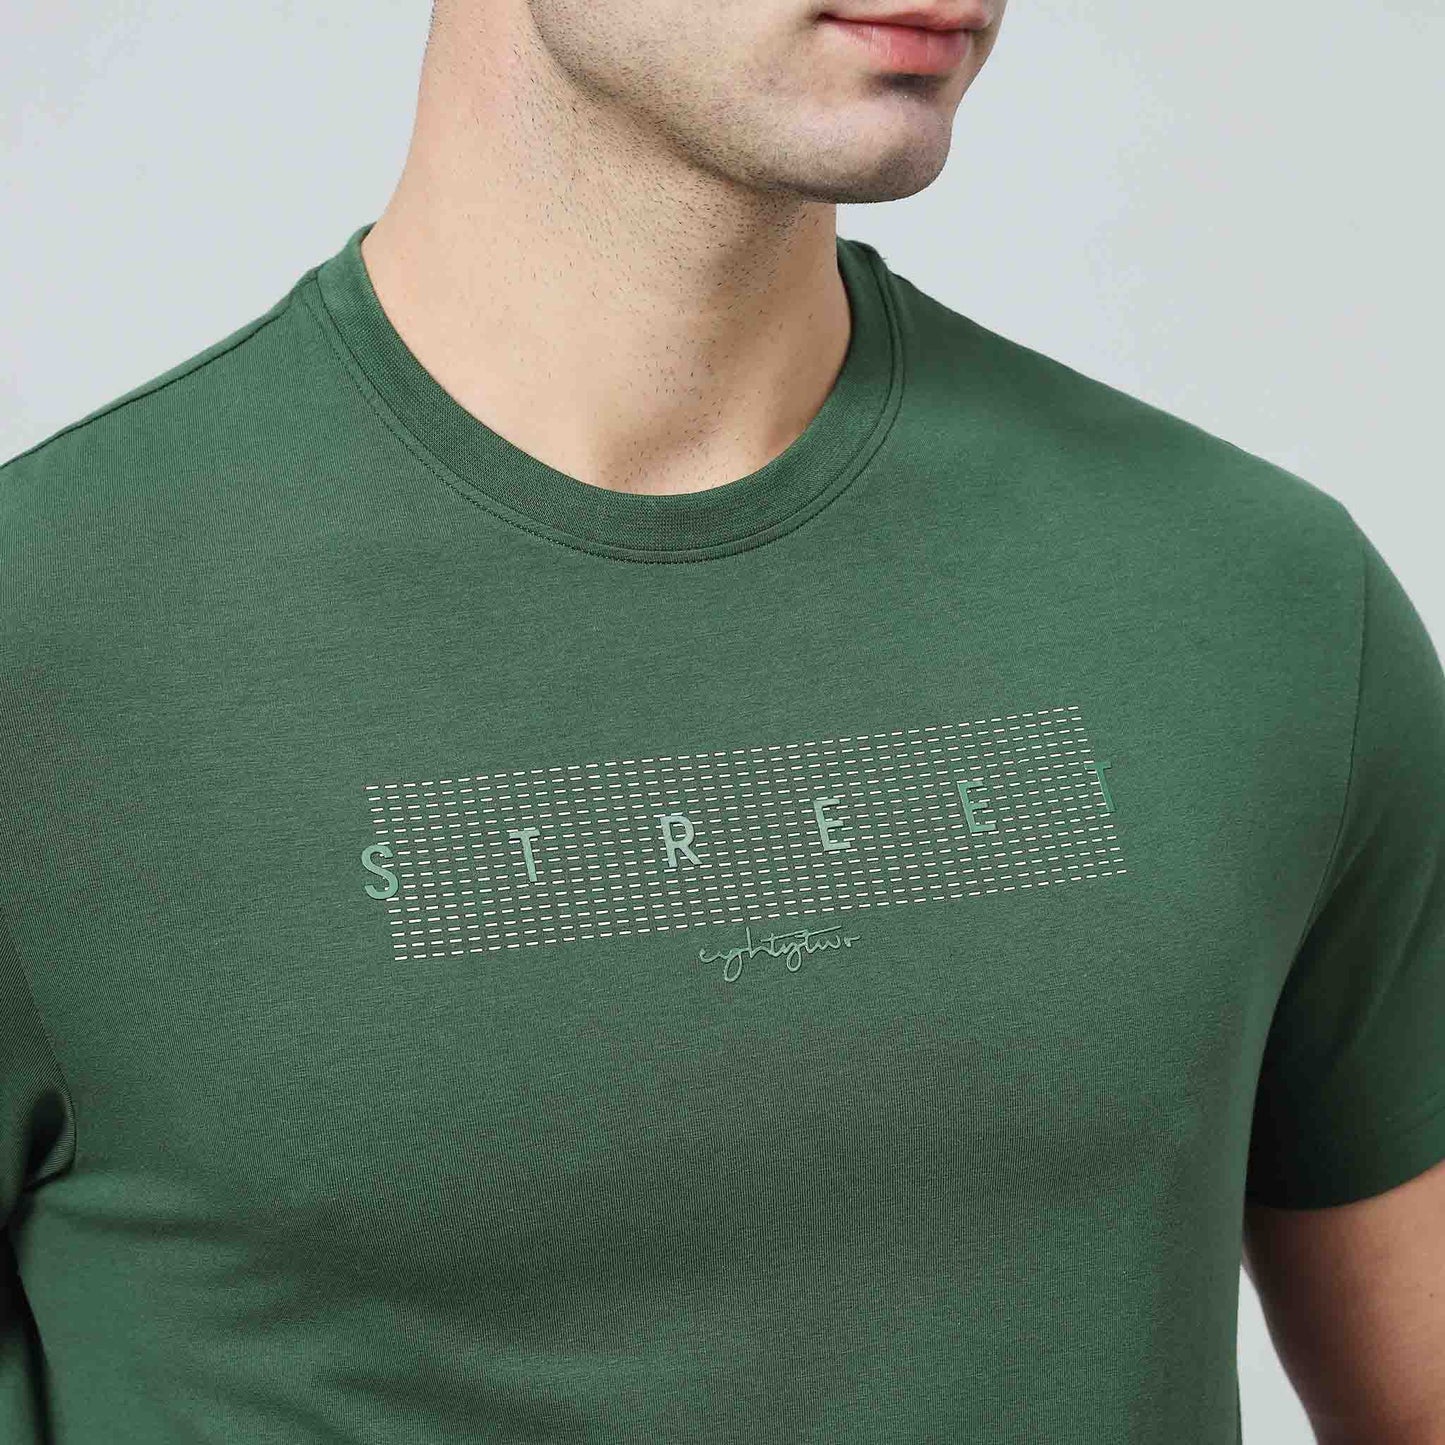 Regular T-shirt - Front silicon print